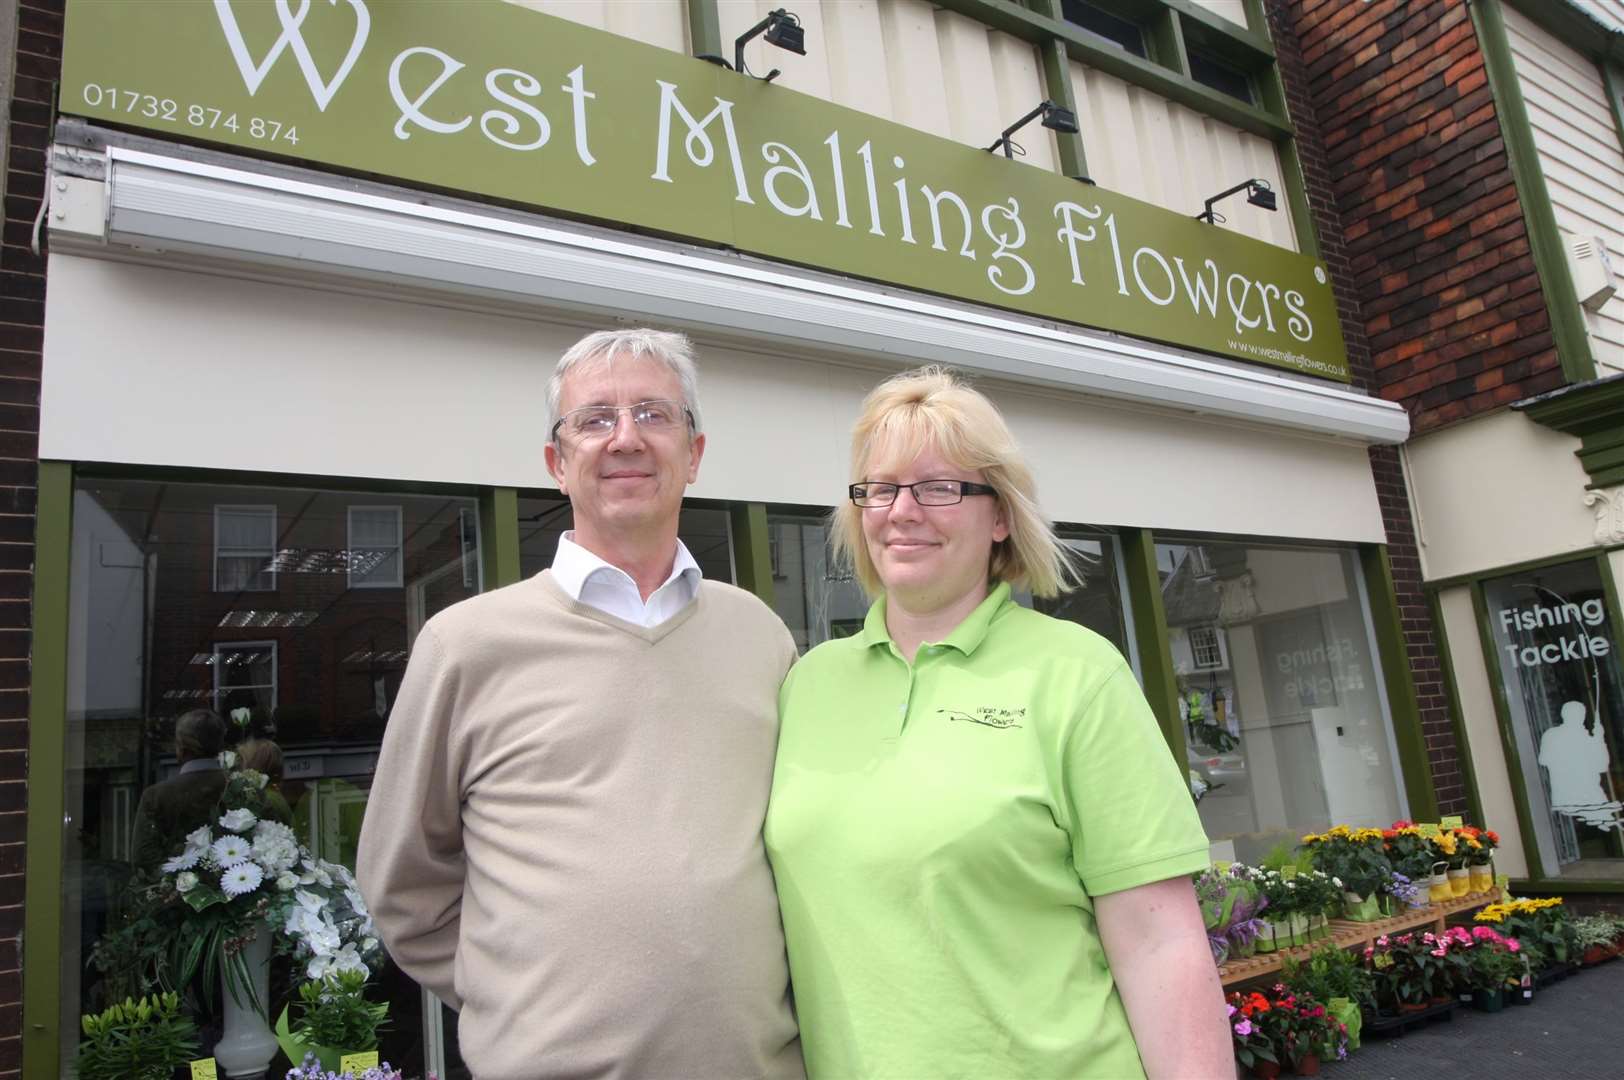 Russell Meader and his wife, Nikki outside their business